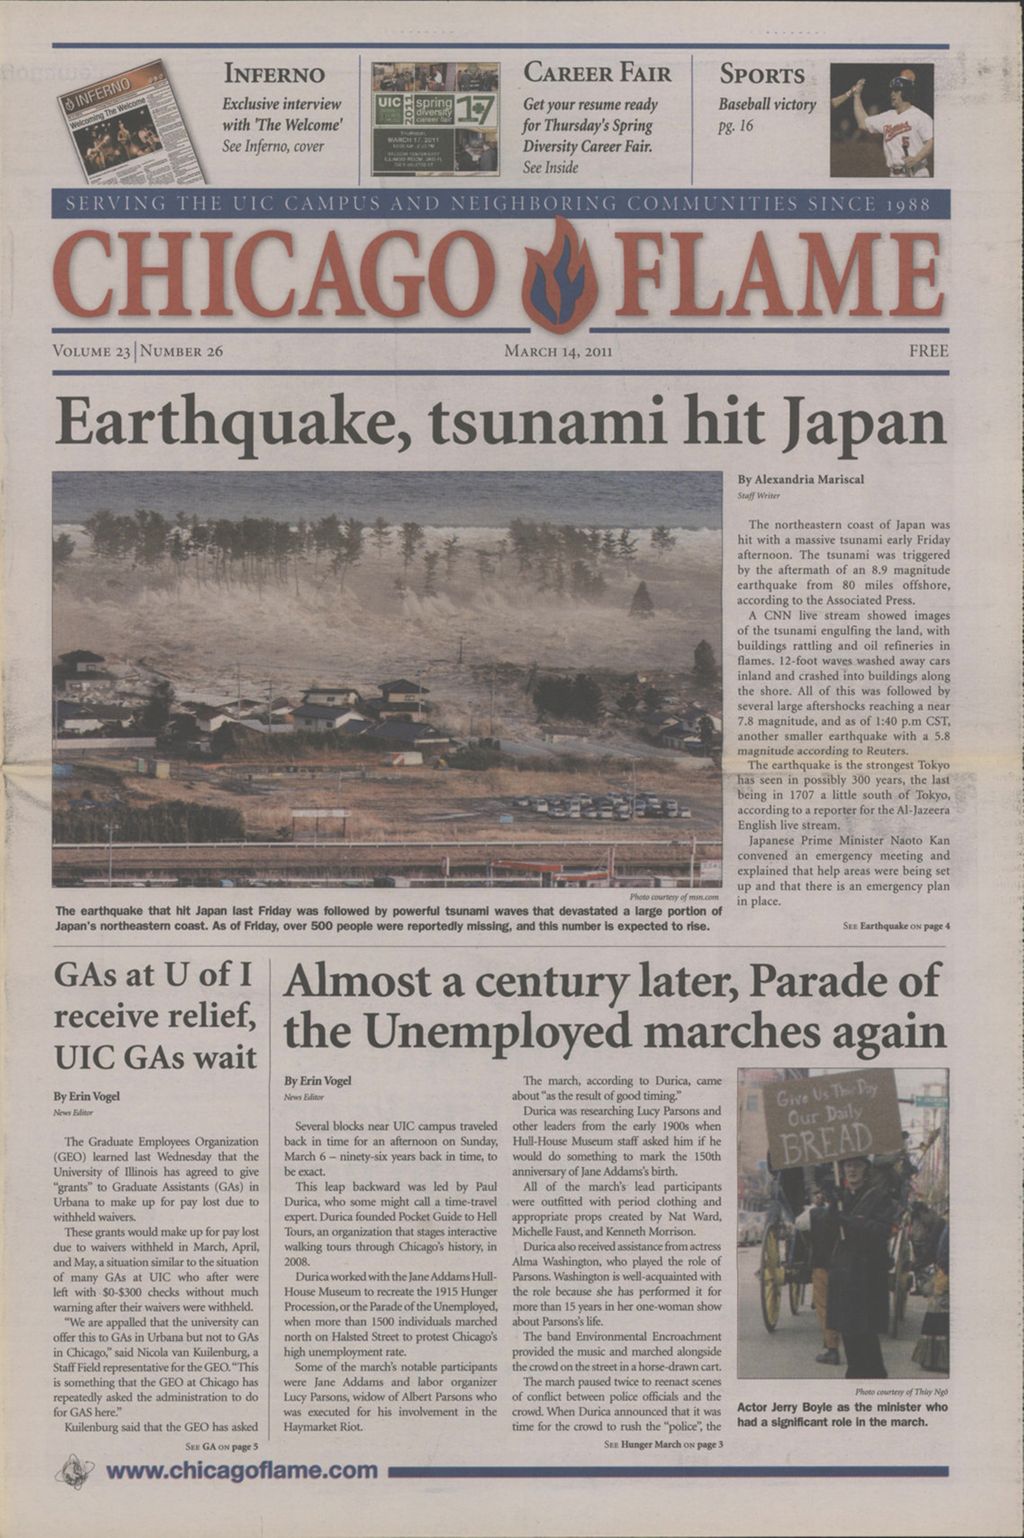 Miniature of Chicago Flame (March 14, 2011)